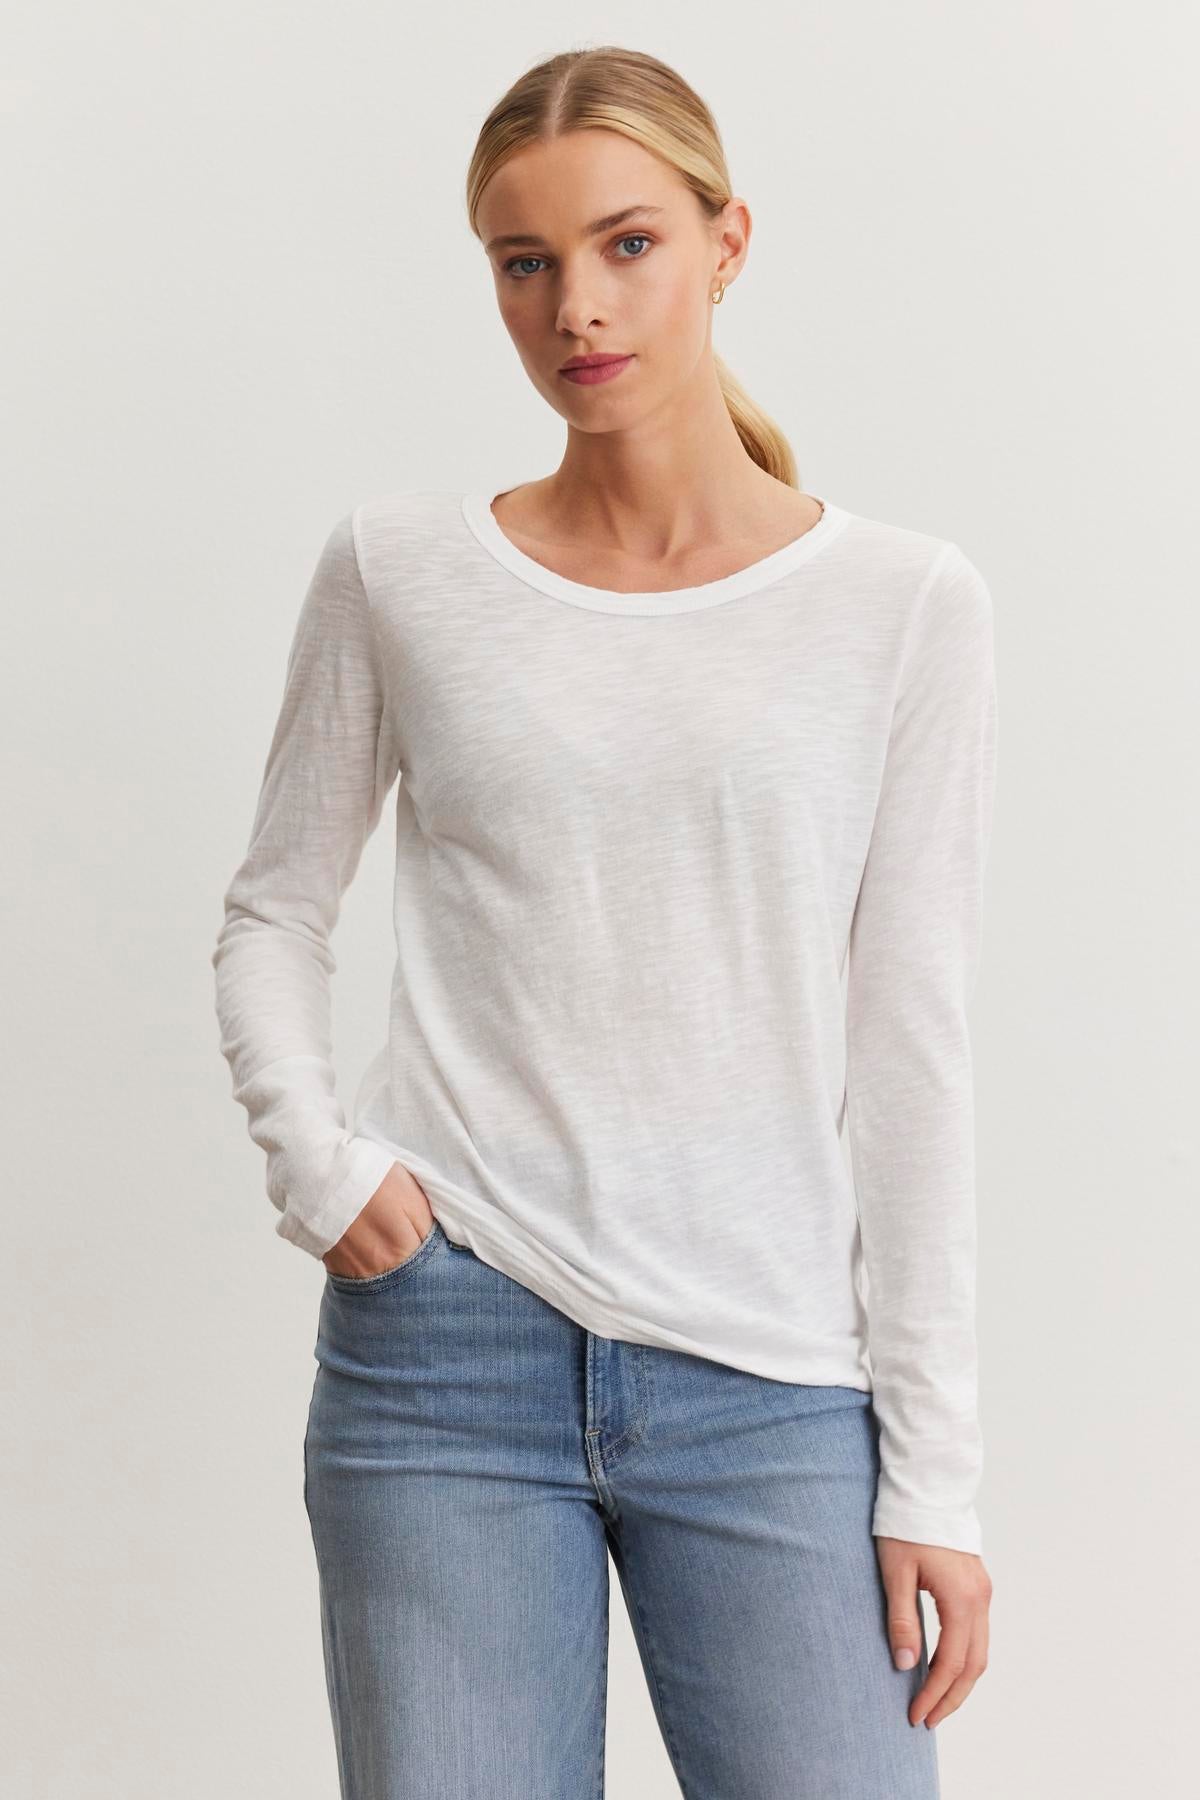 A person with blonde hair in a ponytail is wearing a white long-sleeve, classic crew neckline LIZZIE TEE by Velvet by Graham & Spencer and blue jeans, standing against a plain white background.-37366915137729